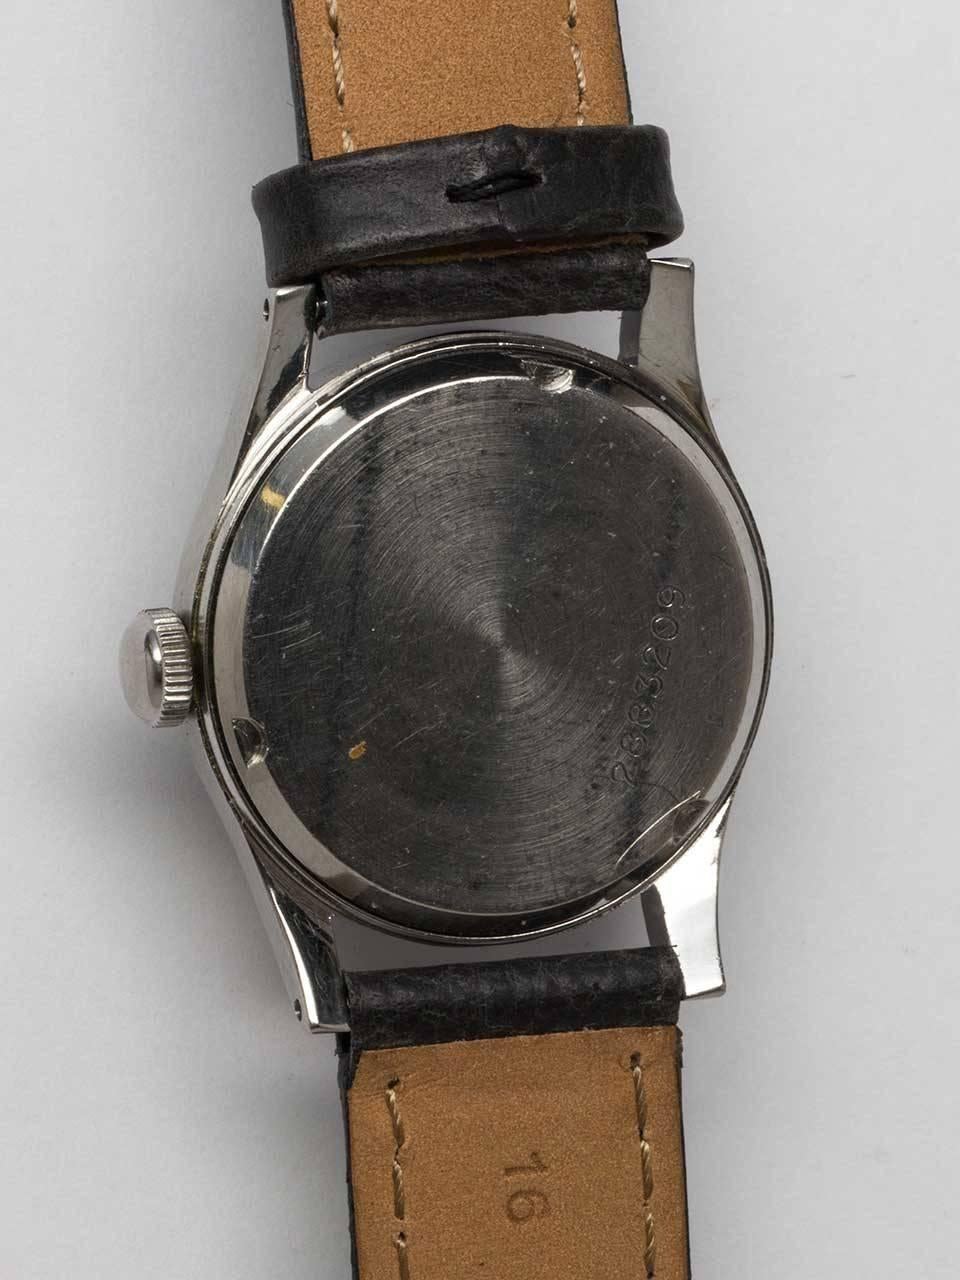 Men's Gubelin Stainless Steel Military Style Wristwatch circa 1940s